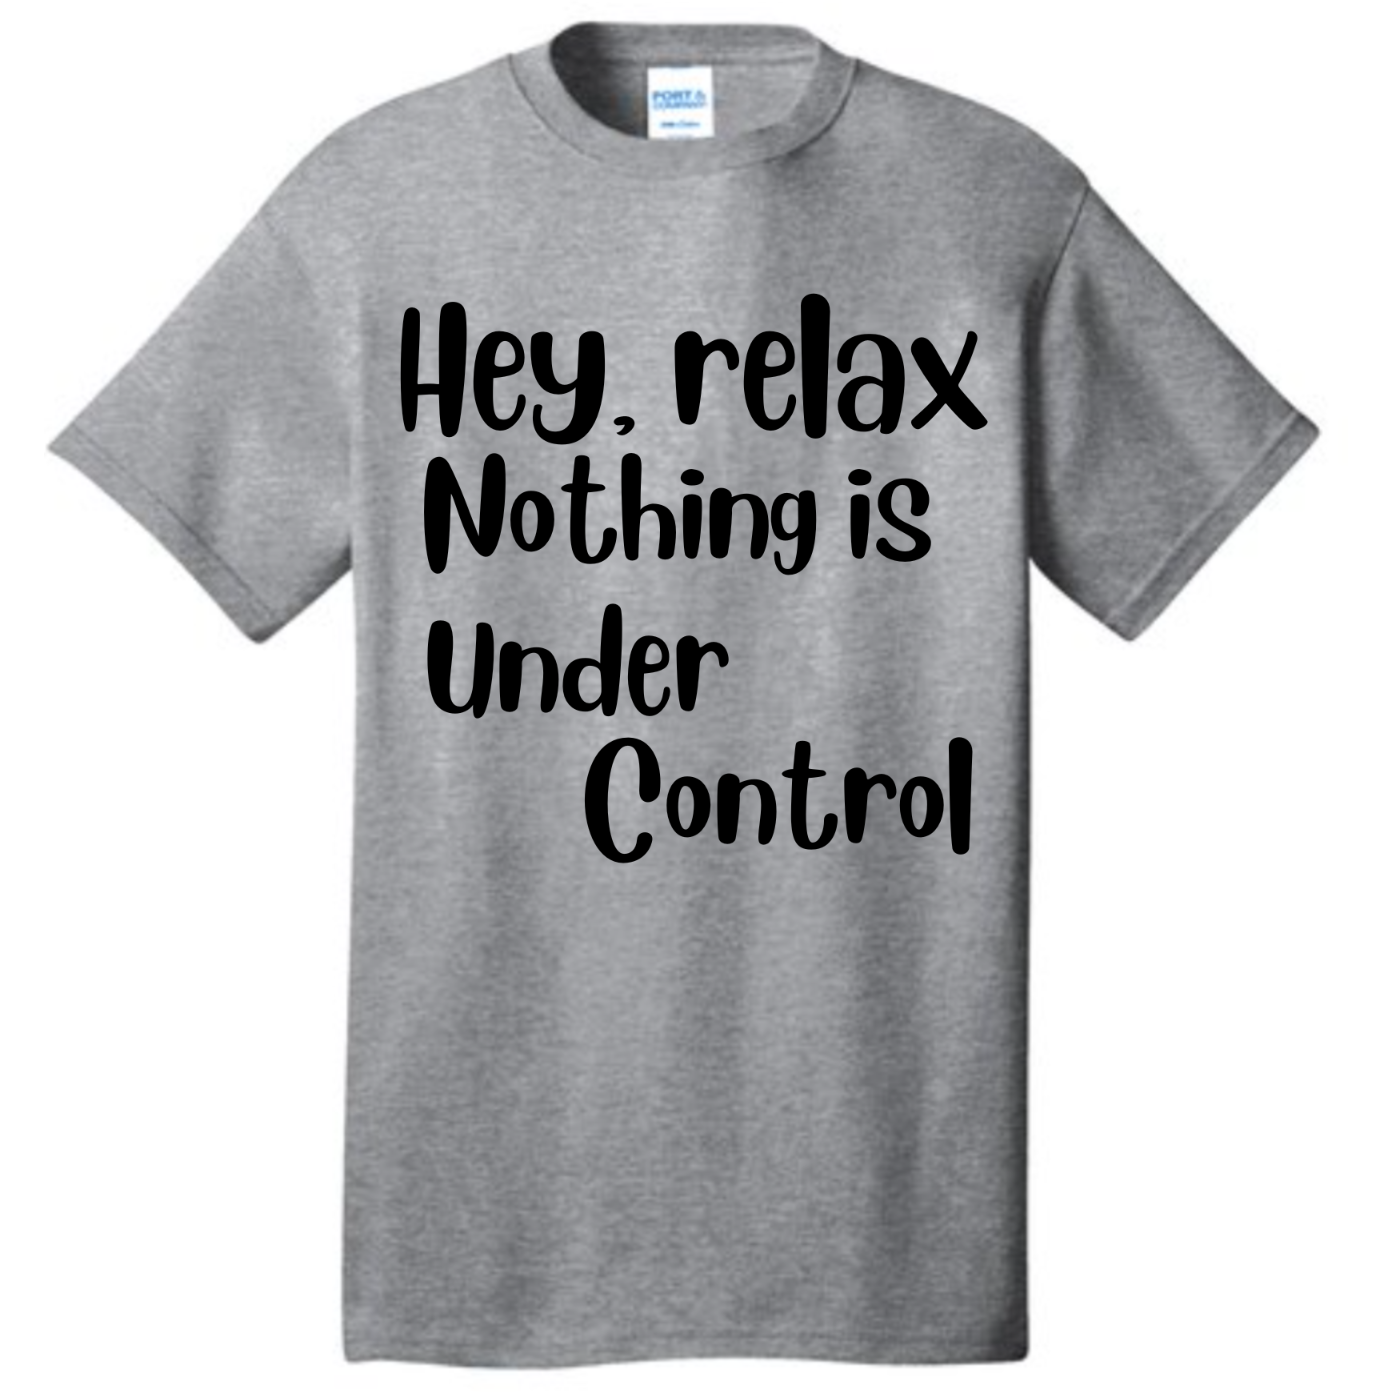 Hey Relax, Nothing is Under Control shirt Shirts & Tops Rose's Colored Designs  Small Gray 